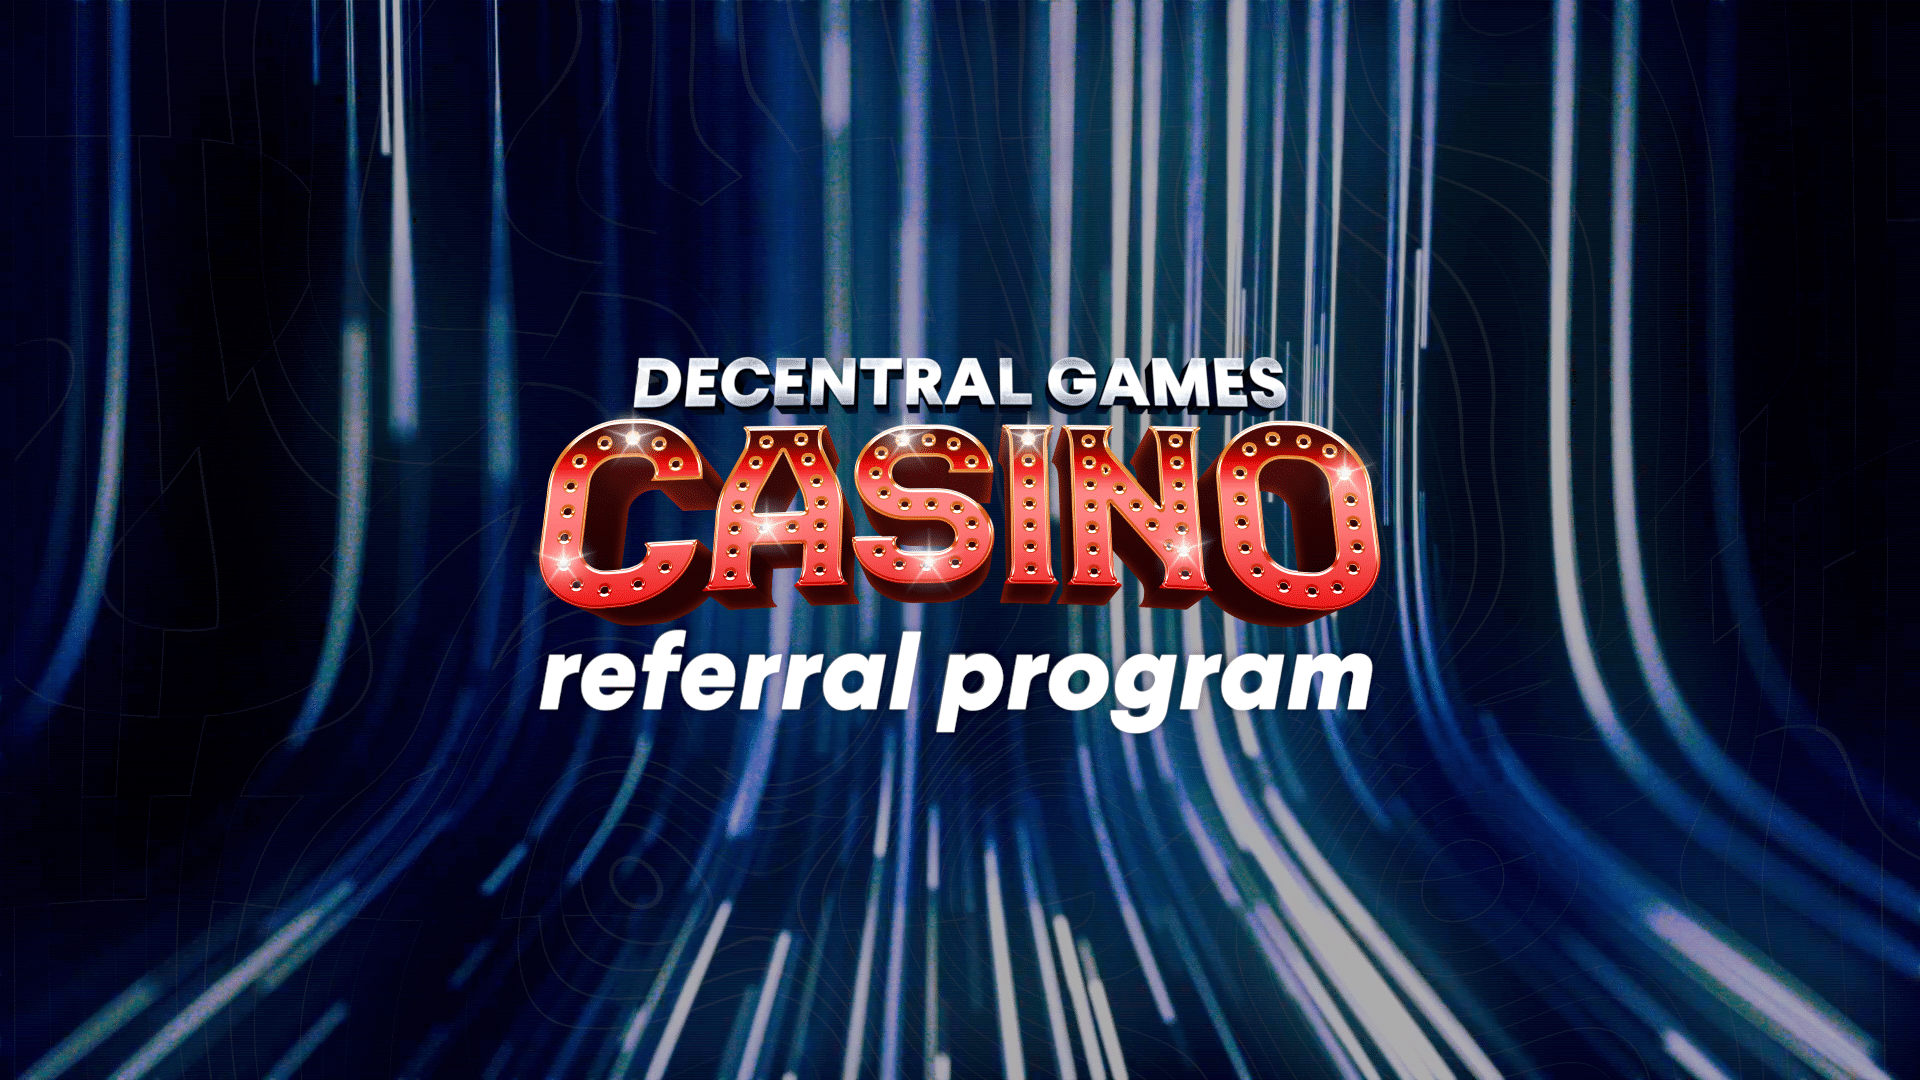 Introducing the Decentral Games Referral Program